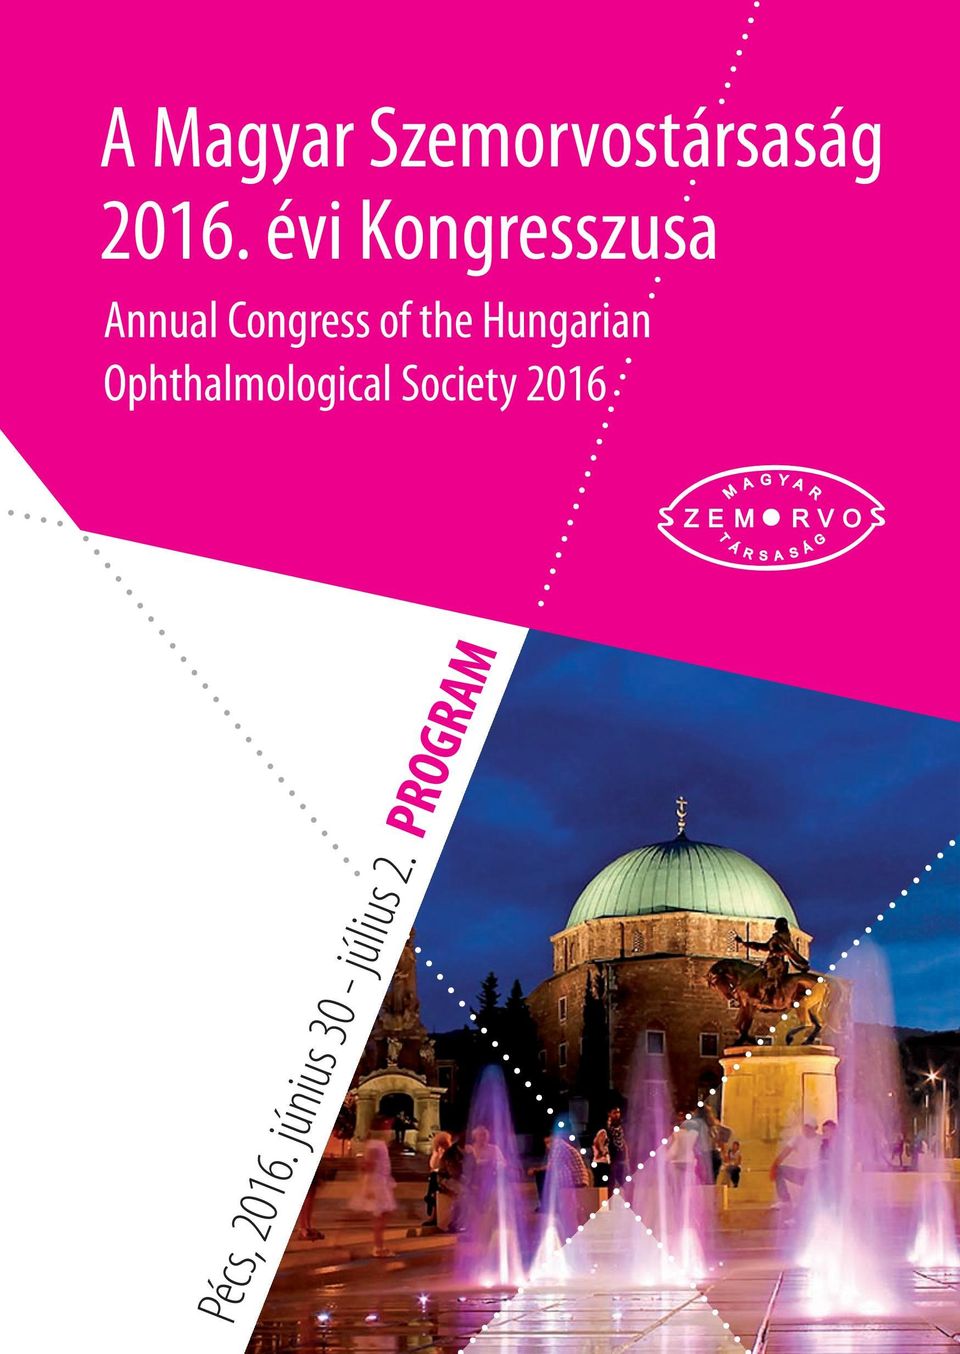 the Hungarian Ophthalmological